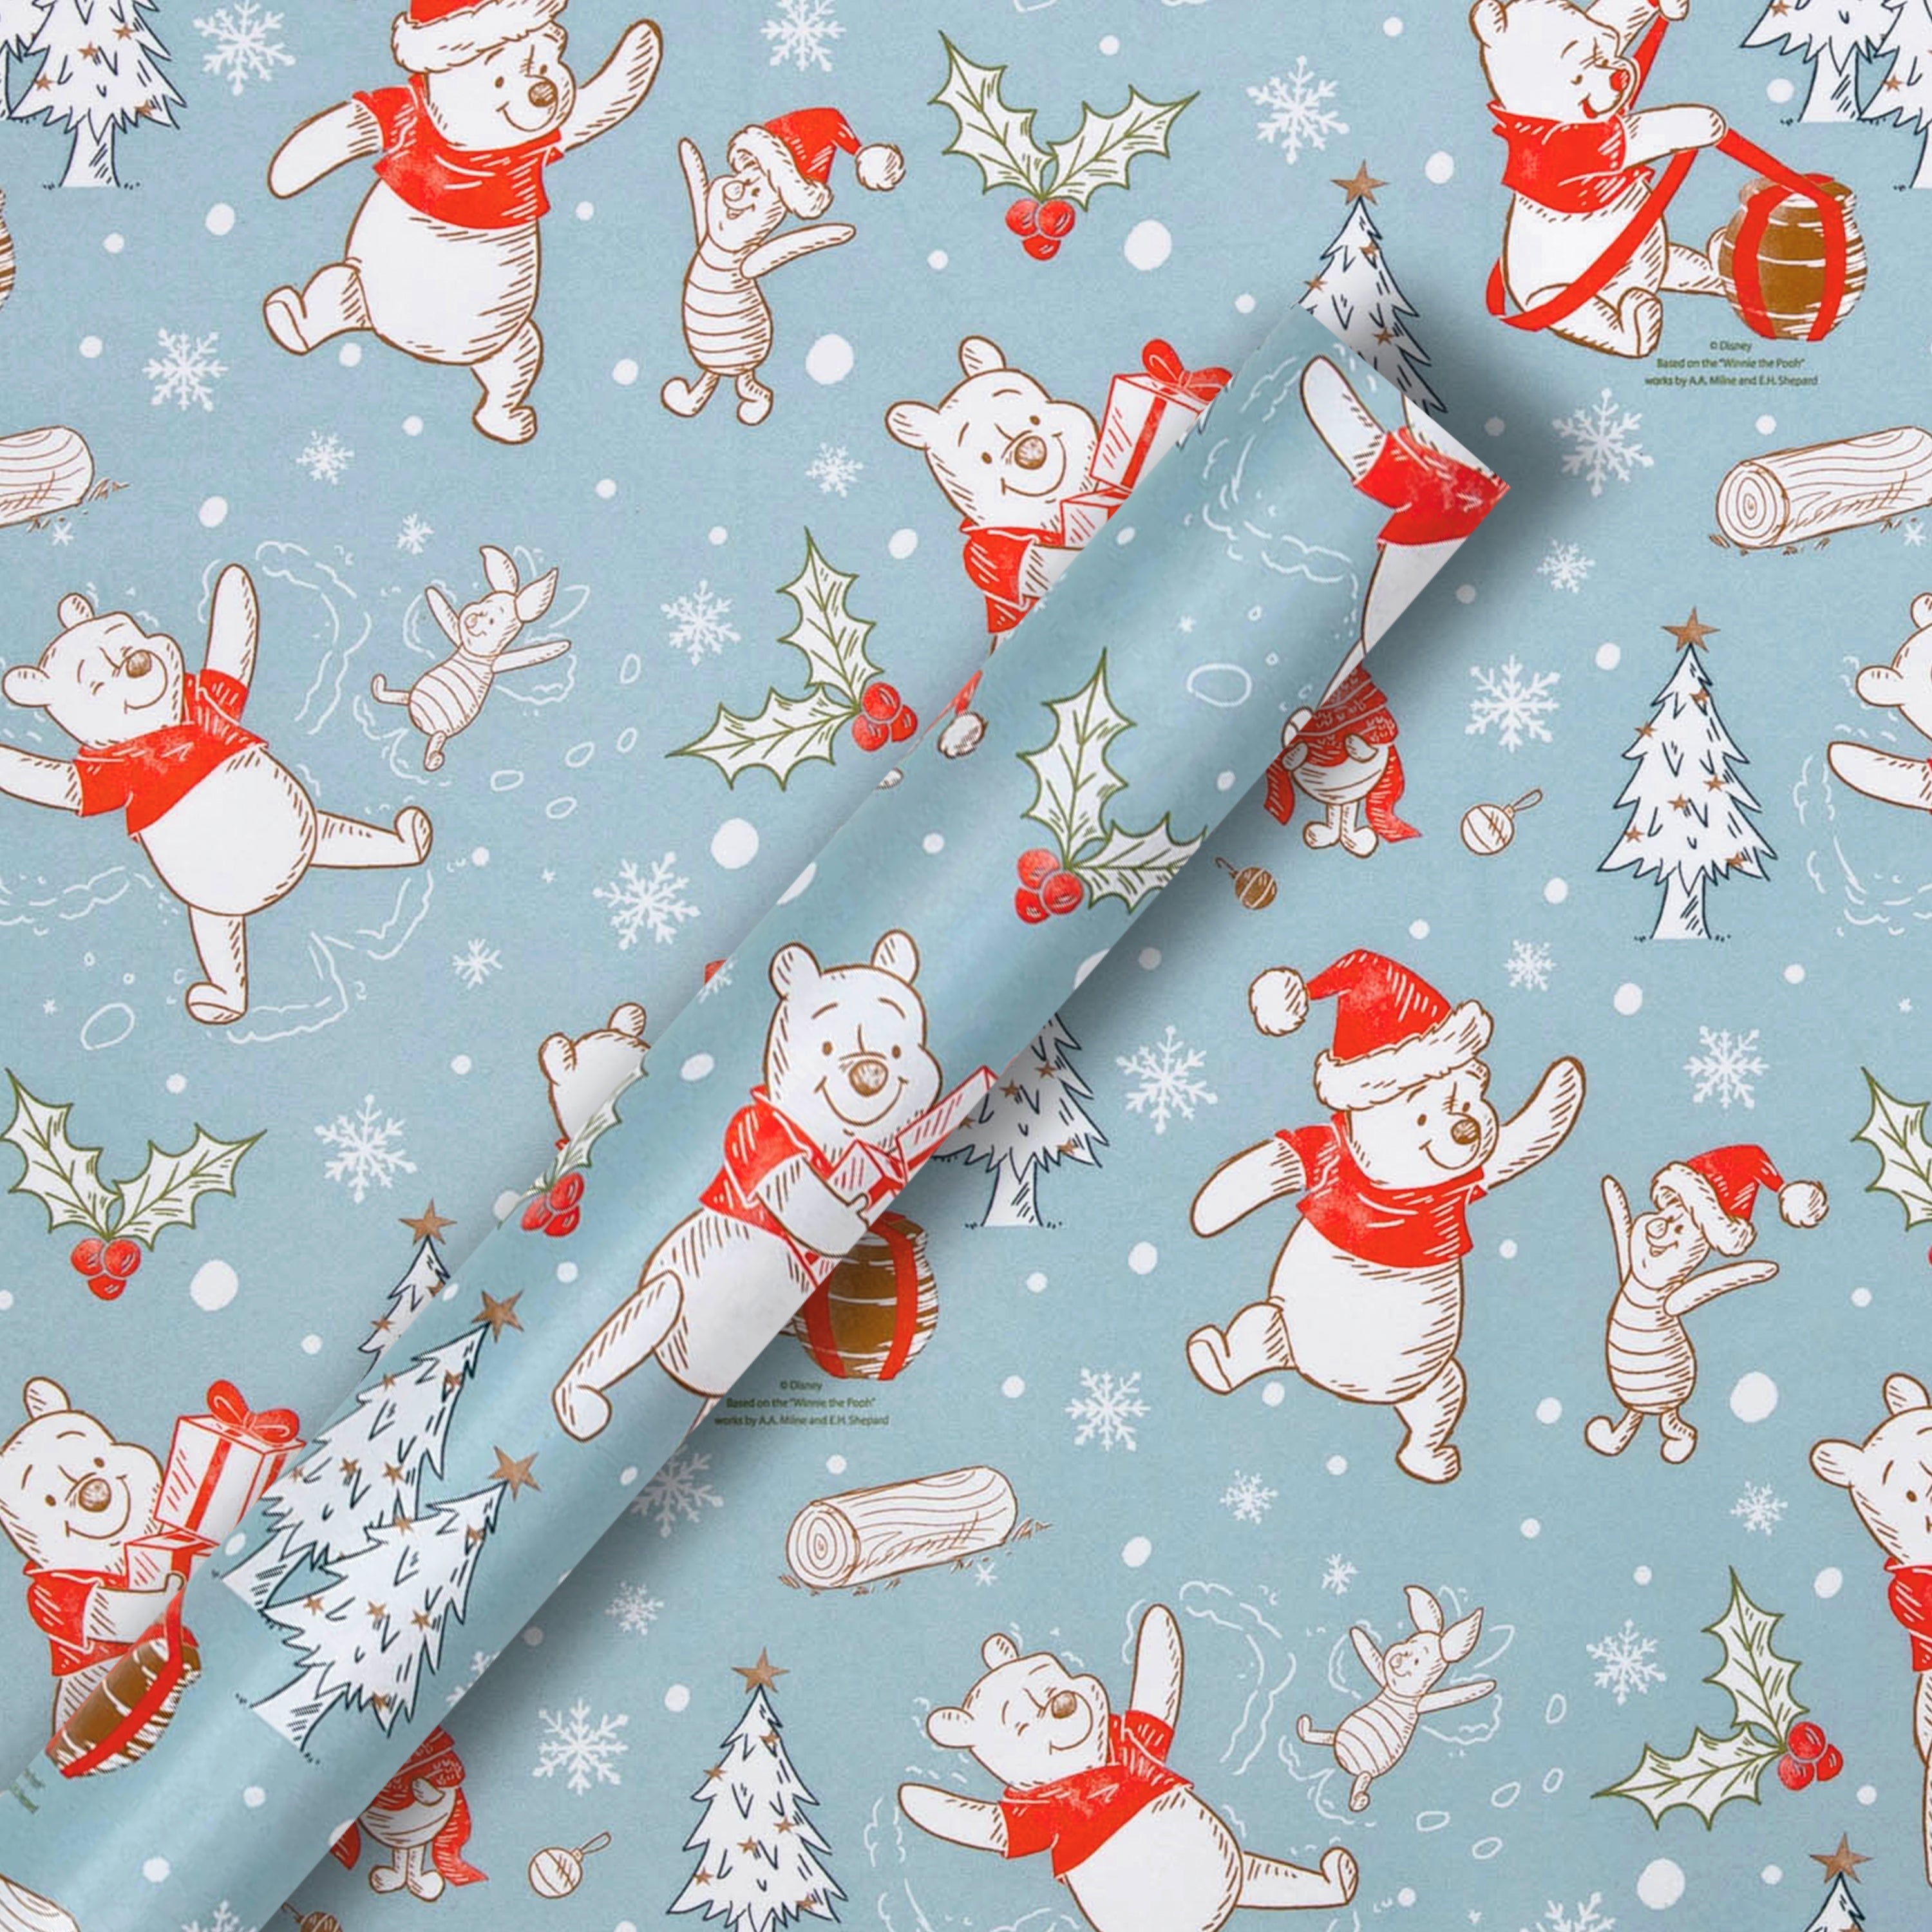 UK Greetings Winnie The Pooh Wrapping Paper; Winnie The Pooh Gifts 2 Sheets & 2 Tags